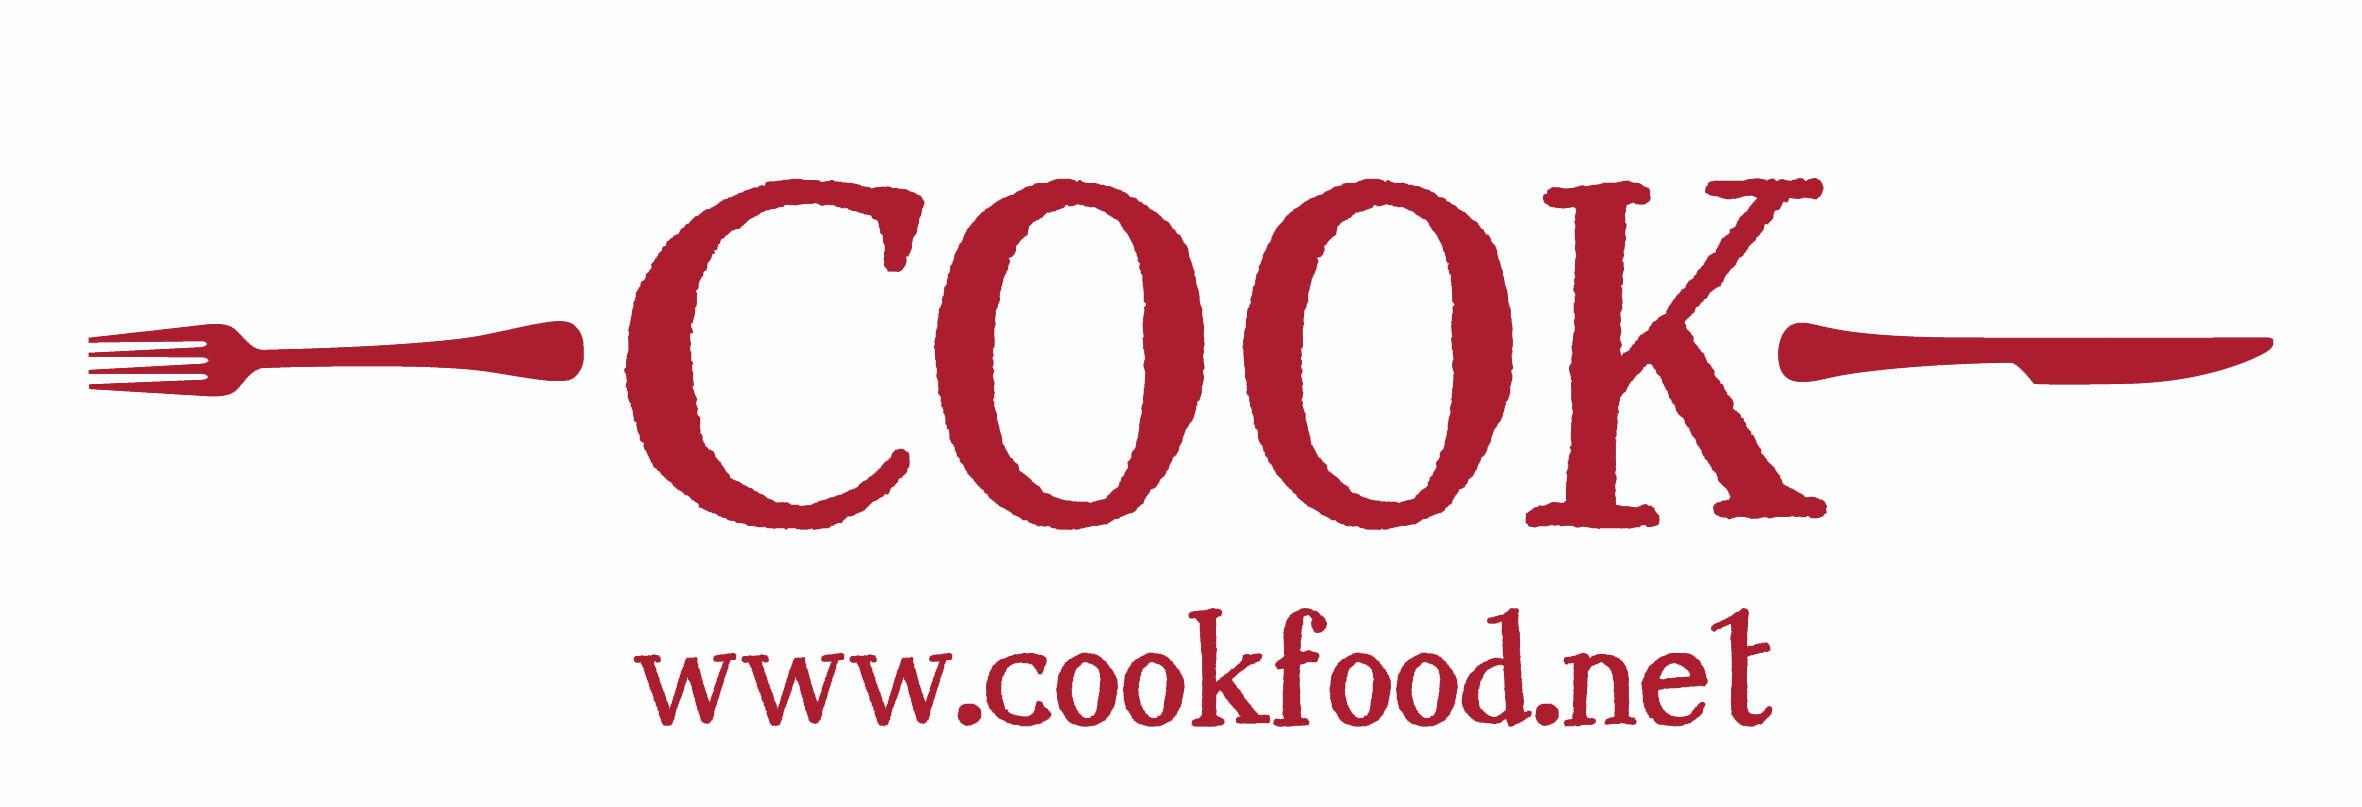 Food with Red Oval Logo - cook-food-logo - FoodCycle